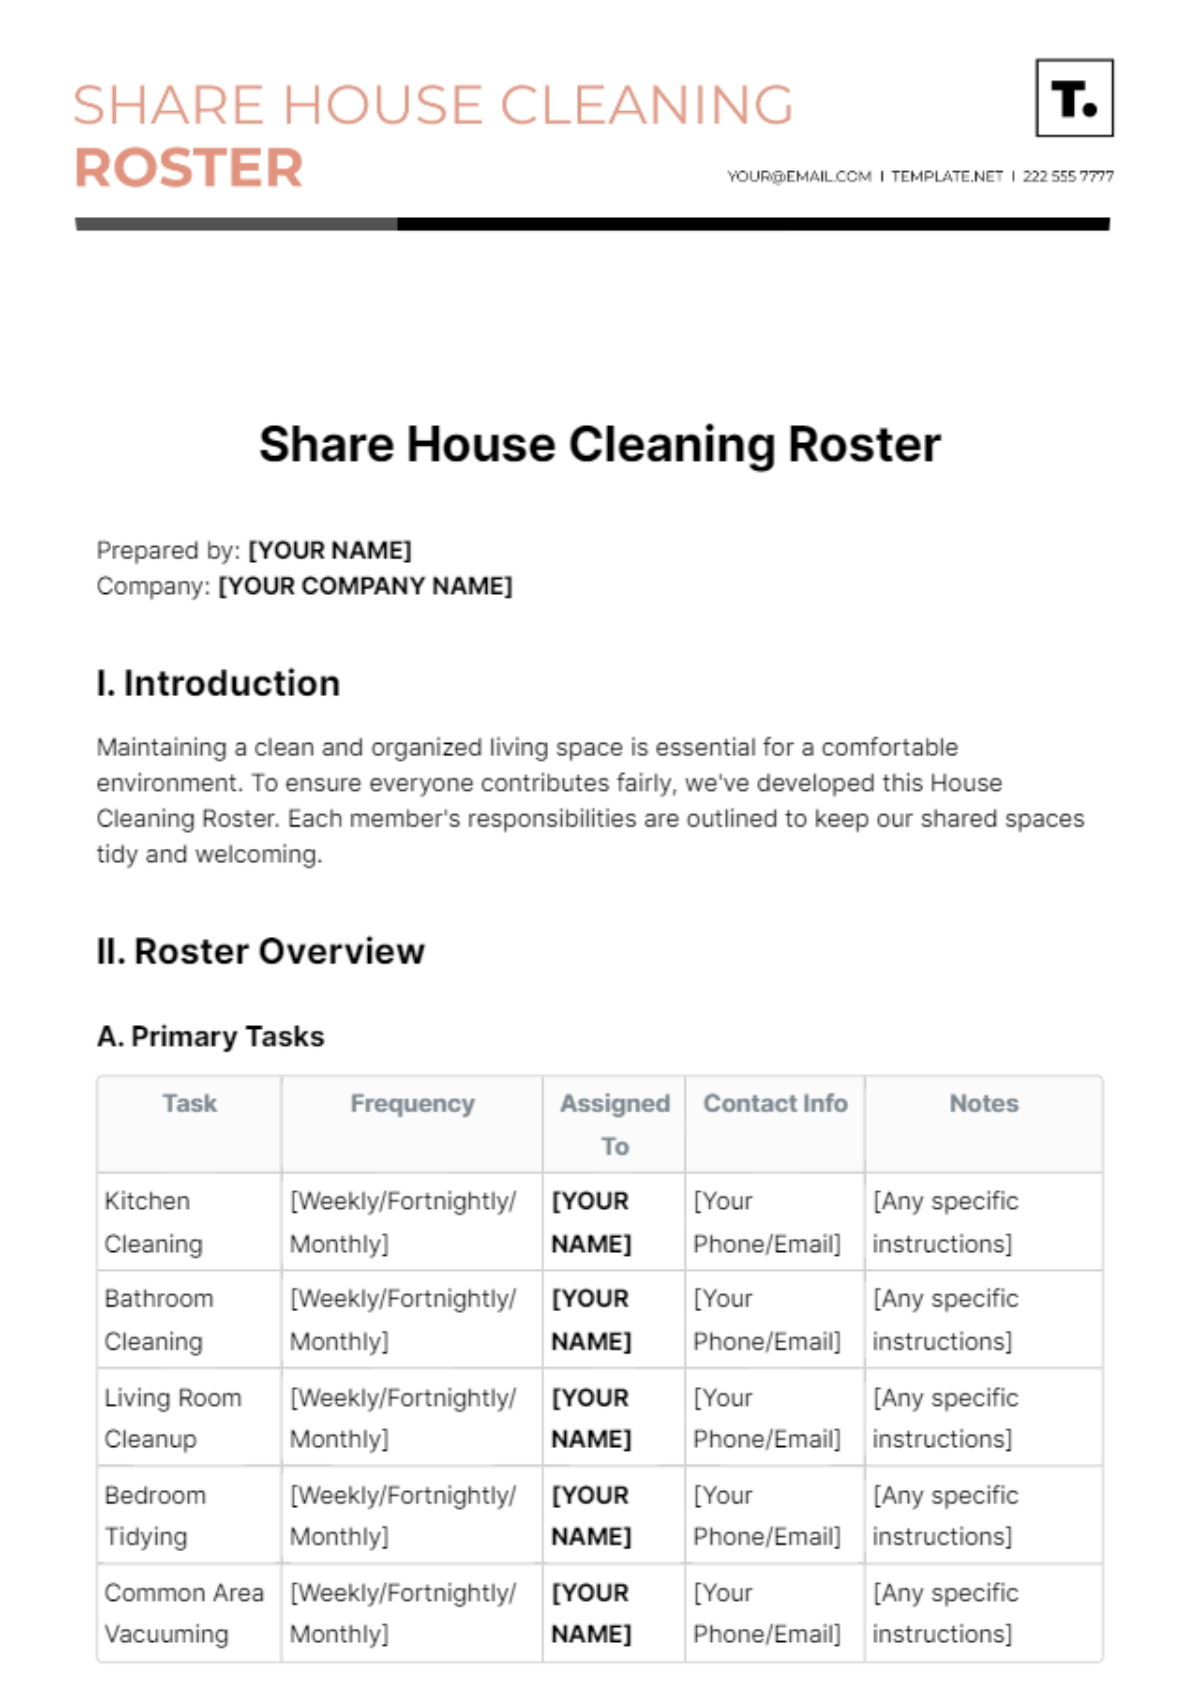 Share House Cleaning Roster Template